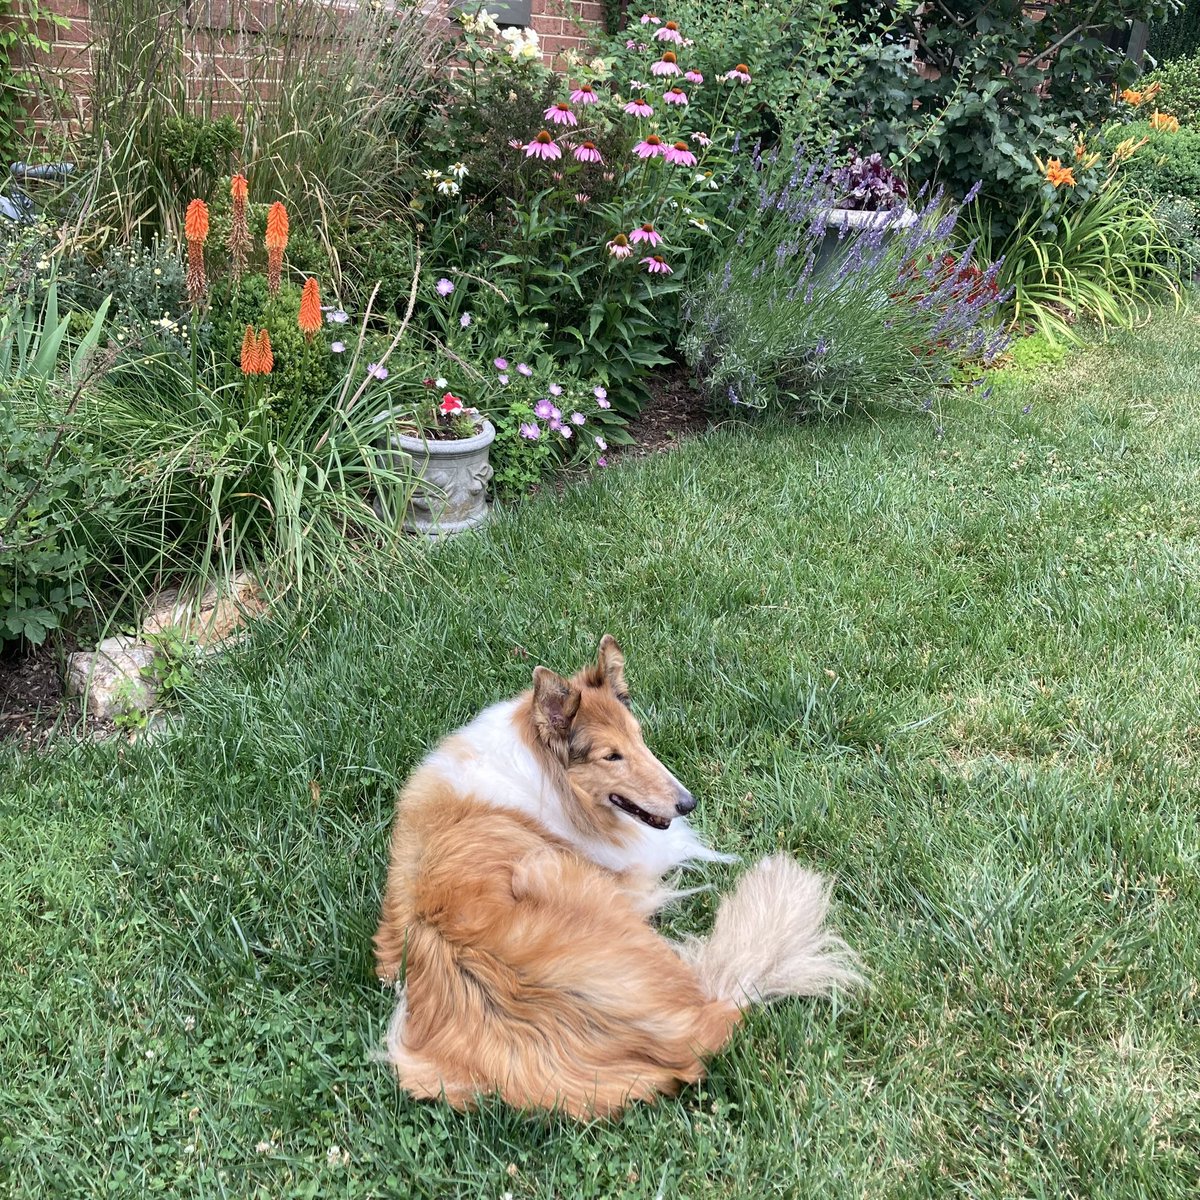 Do I look ruffled around the edges?  This is me enjoying some collie flowers on 👅#tongueouttuesday after I got home from the vet clinic.  

#roughcollie #seniordog #collie #ruffday #collieflower